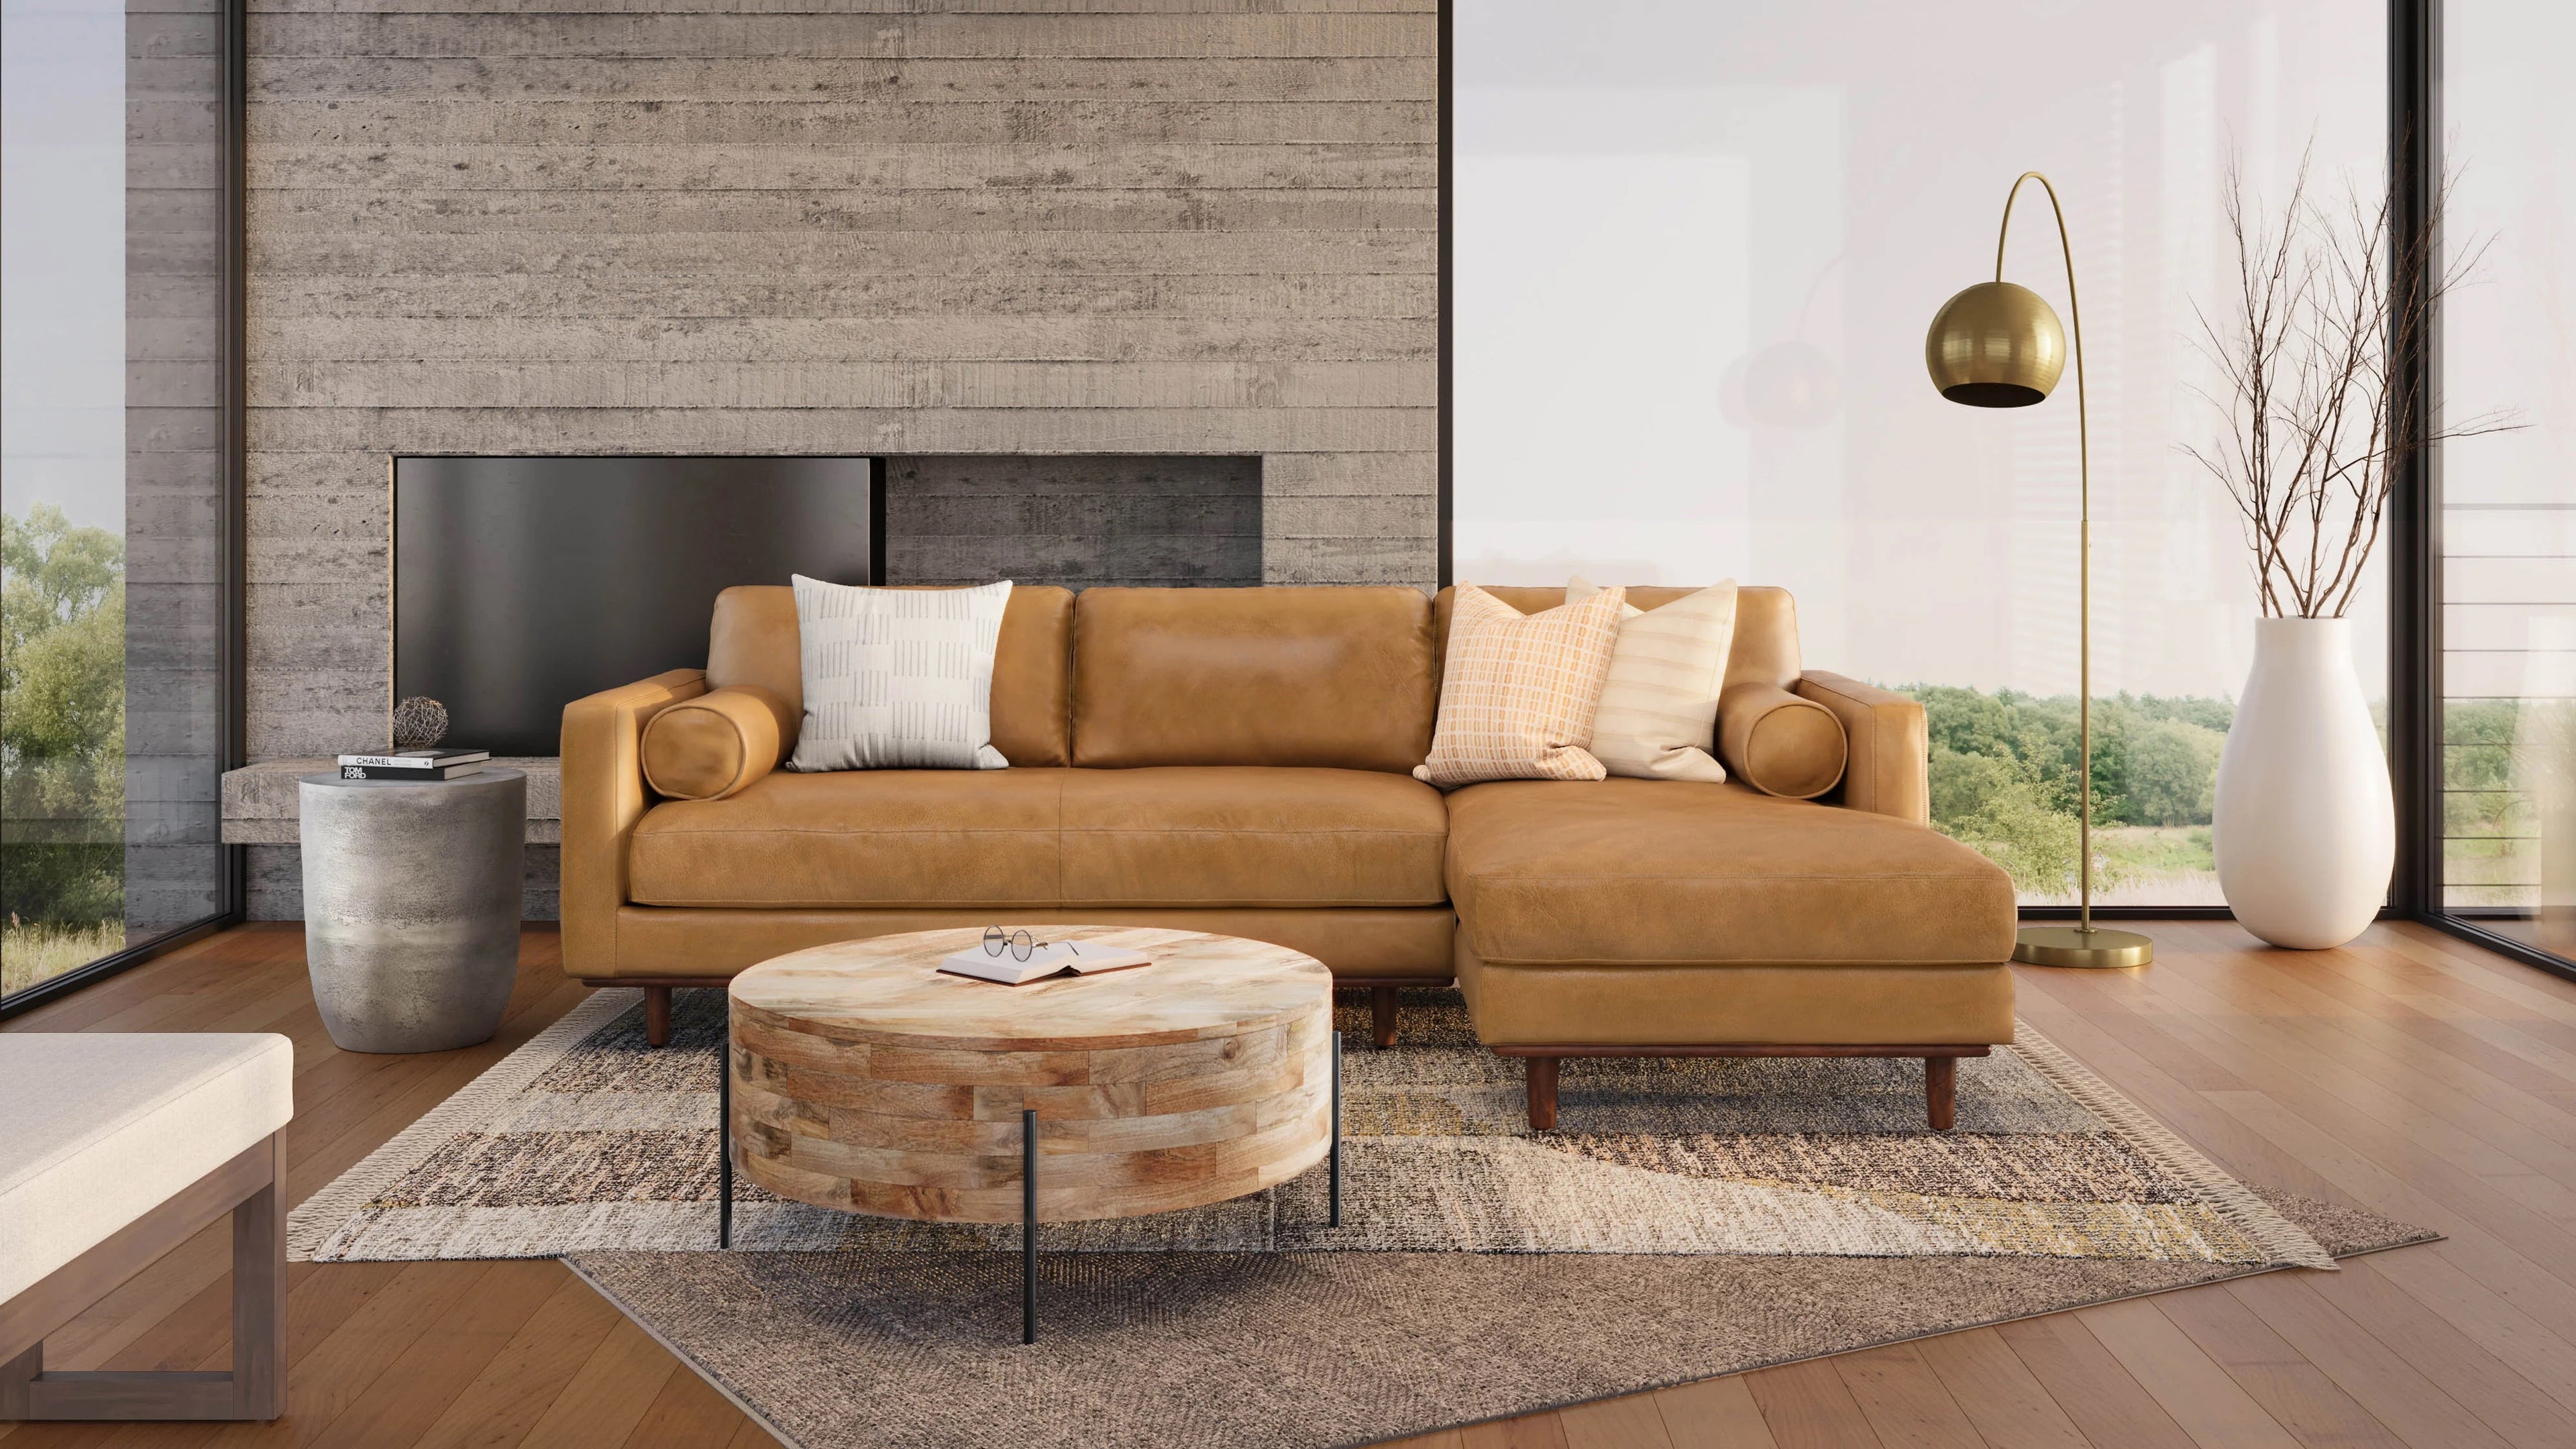 A modern living room featuring a brown leather sectional sofa with pillows, a round wooden coffee table, and a floor lamp with a gold finish. The room has wooden floors, a large window with a scenic view, and a gray-textured wall with a built-in fireplace.